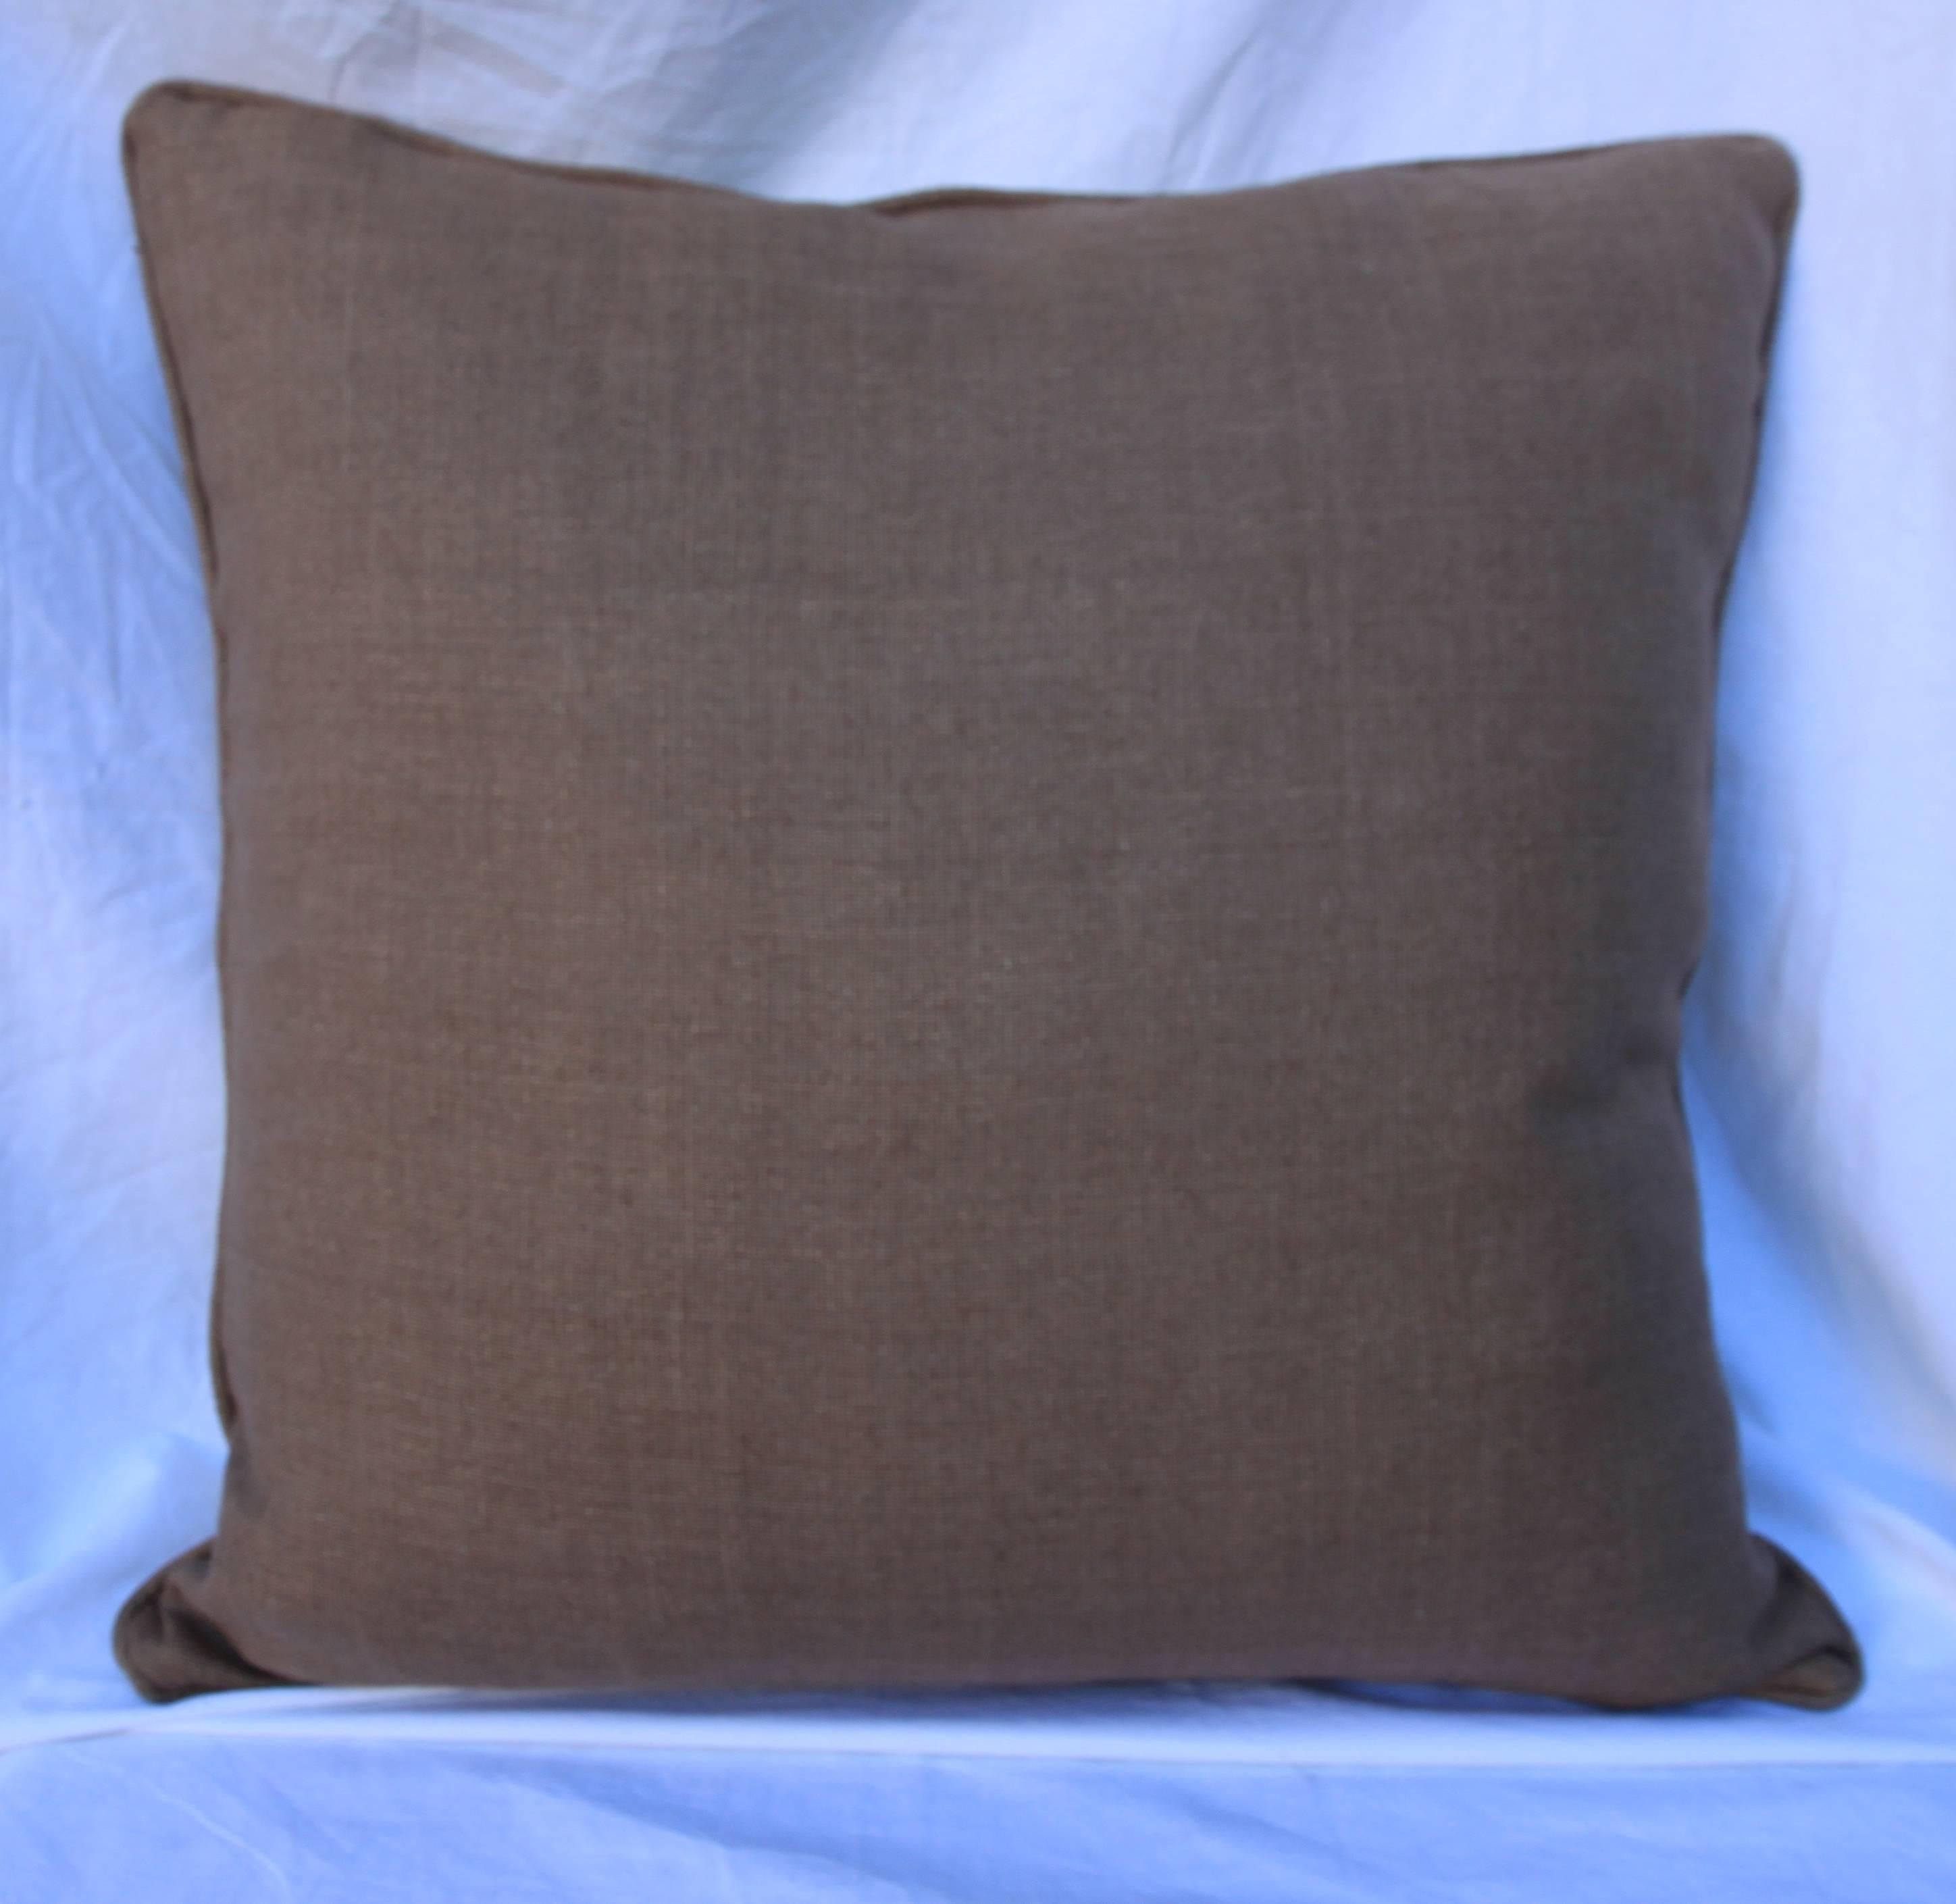 Pair of Rose Tarlow printed linen pillow with linen back and self cord detail. Down inserts, sewn shut.